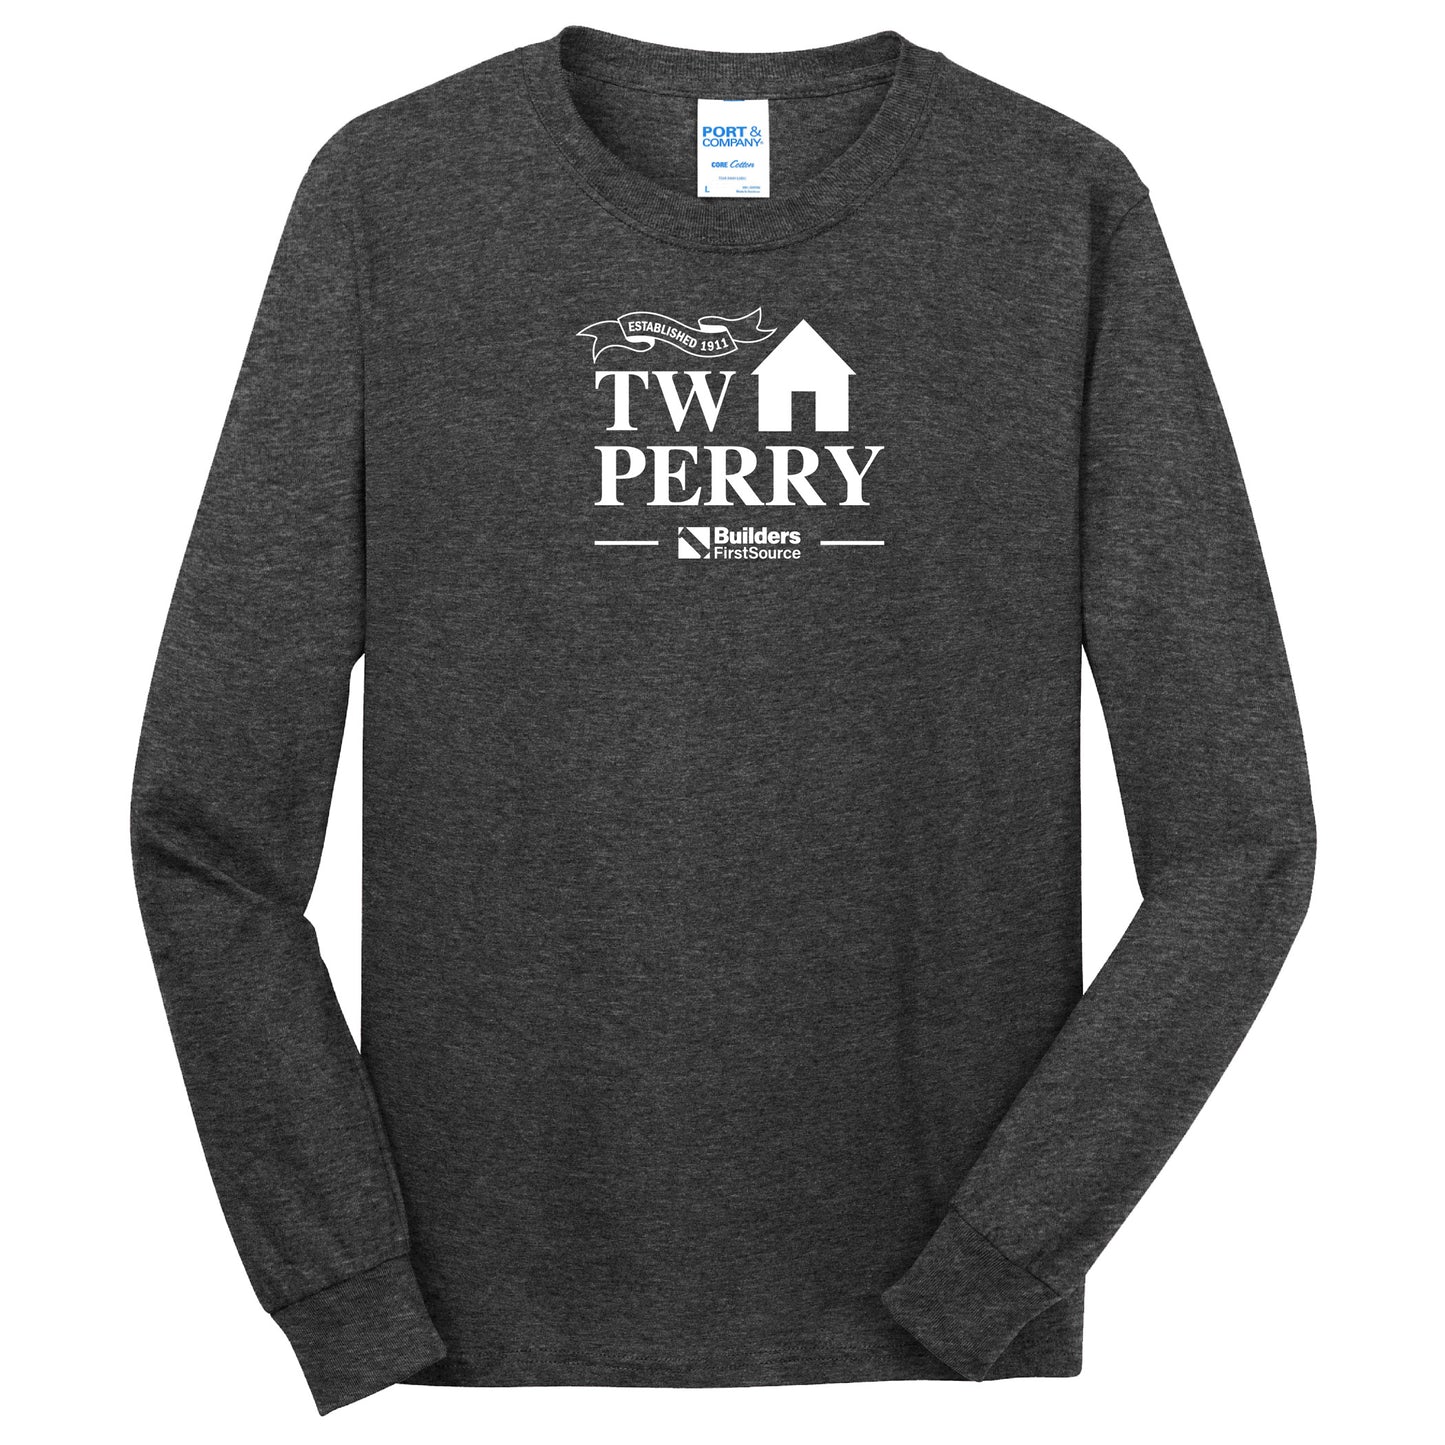 TW Perry - Long Sleeve Core Cotton Tee